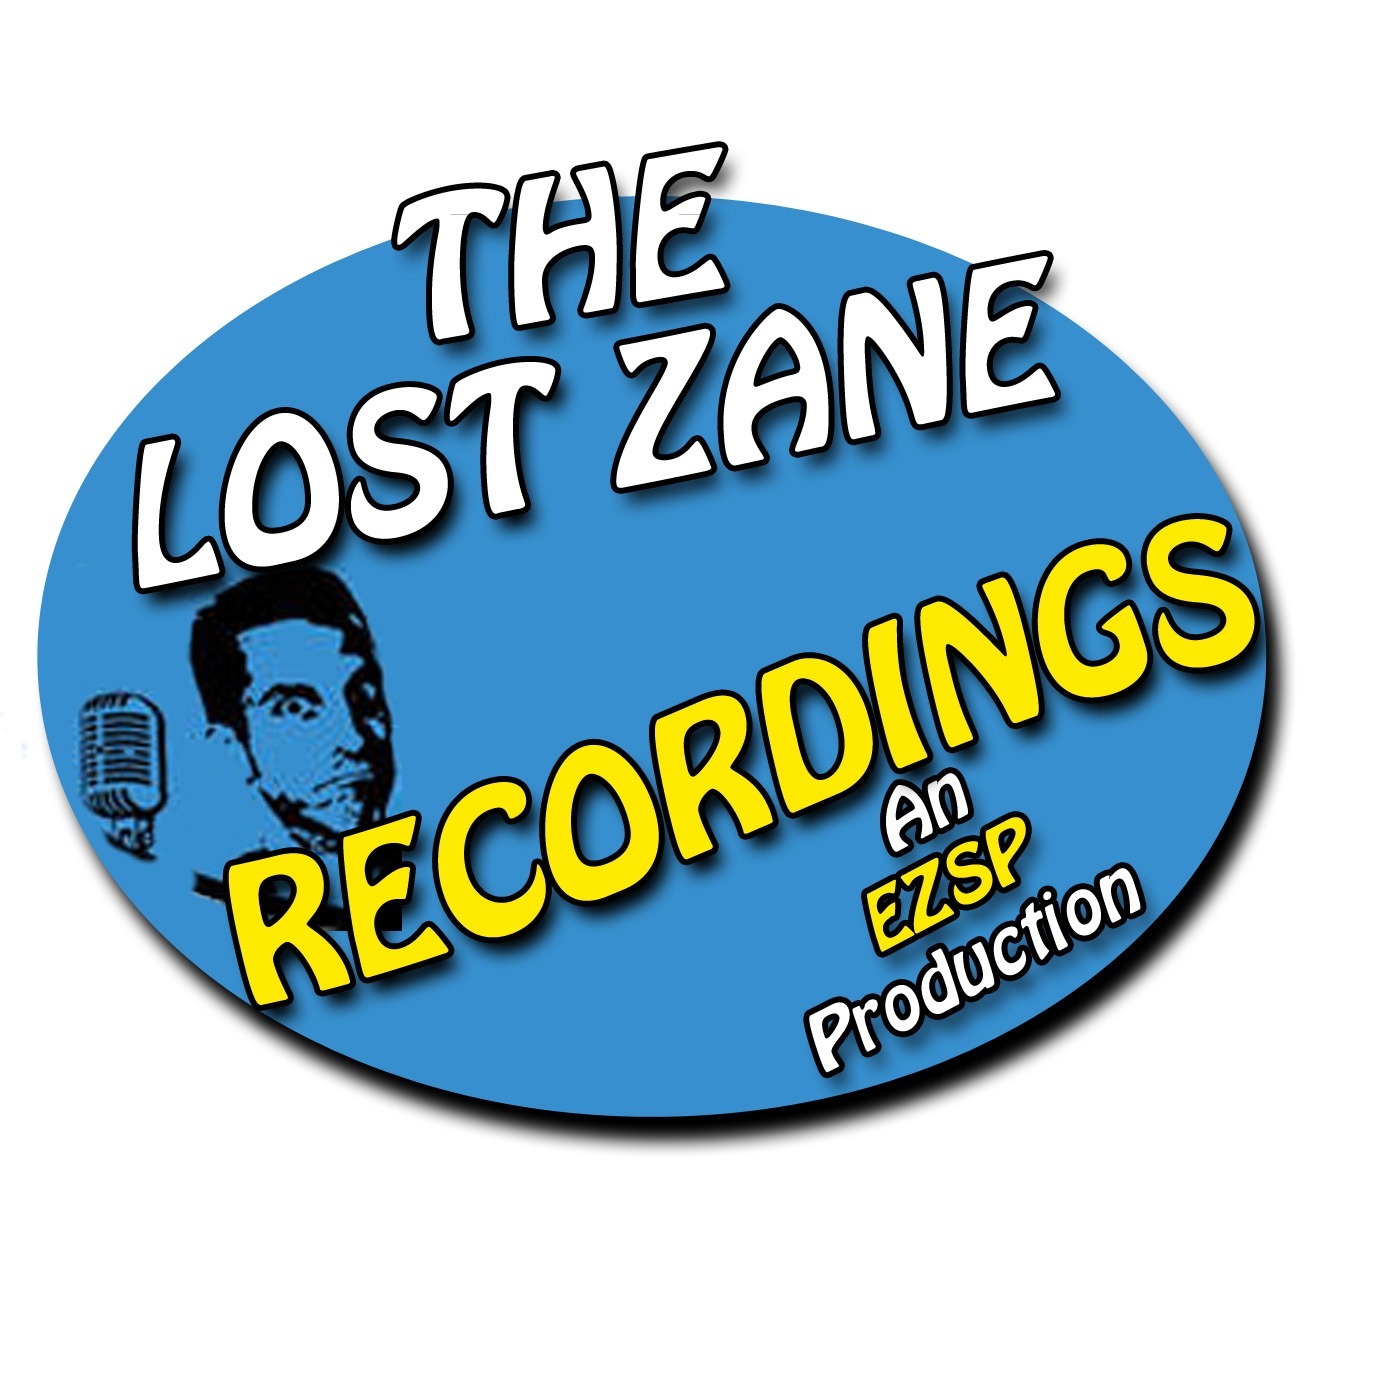 Lost Zane Recordings FREEview - The Make the Operator Laugh Challenge